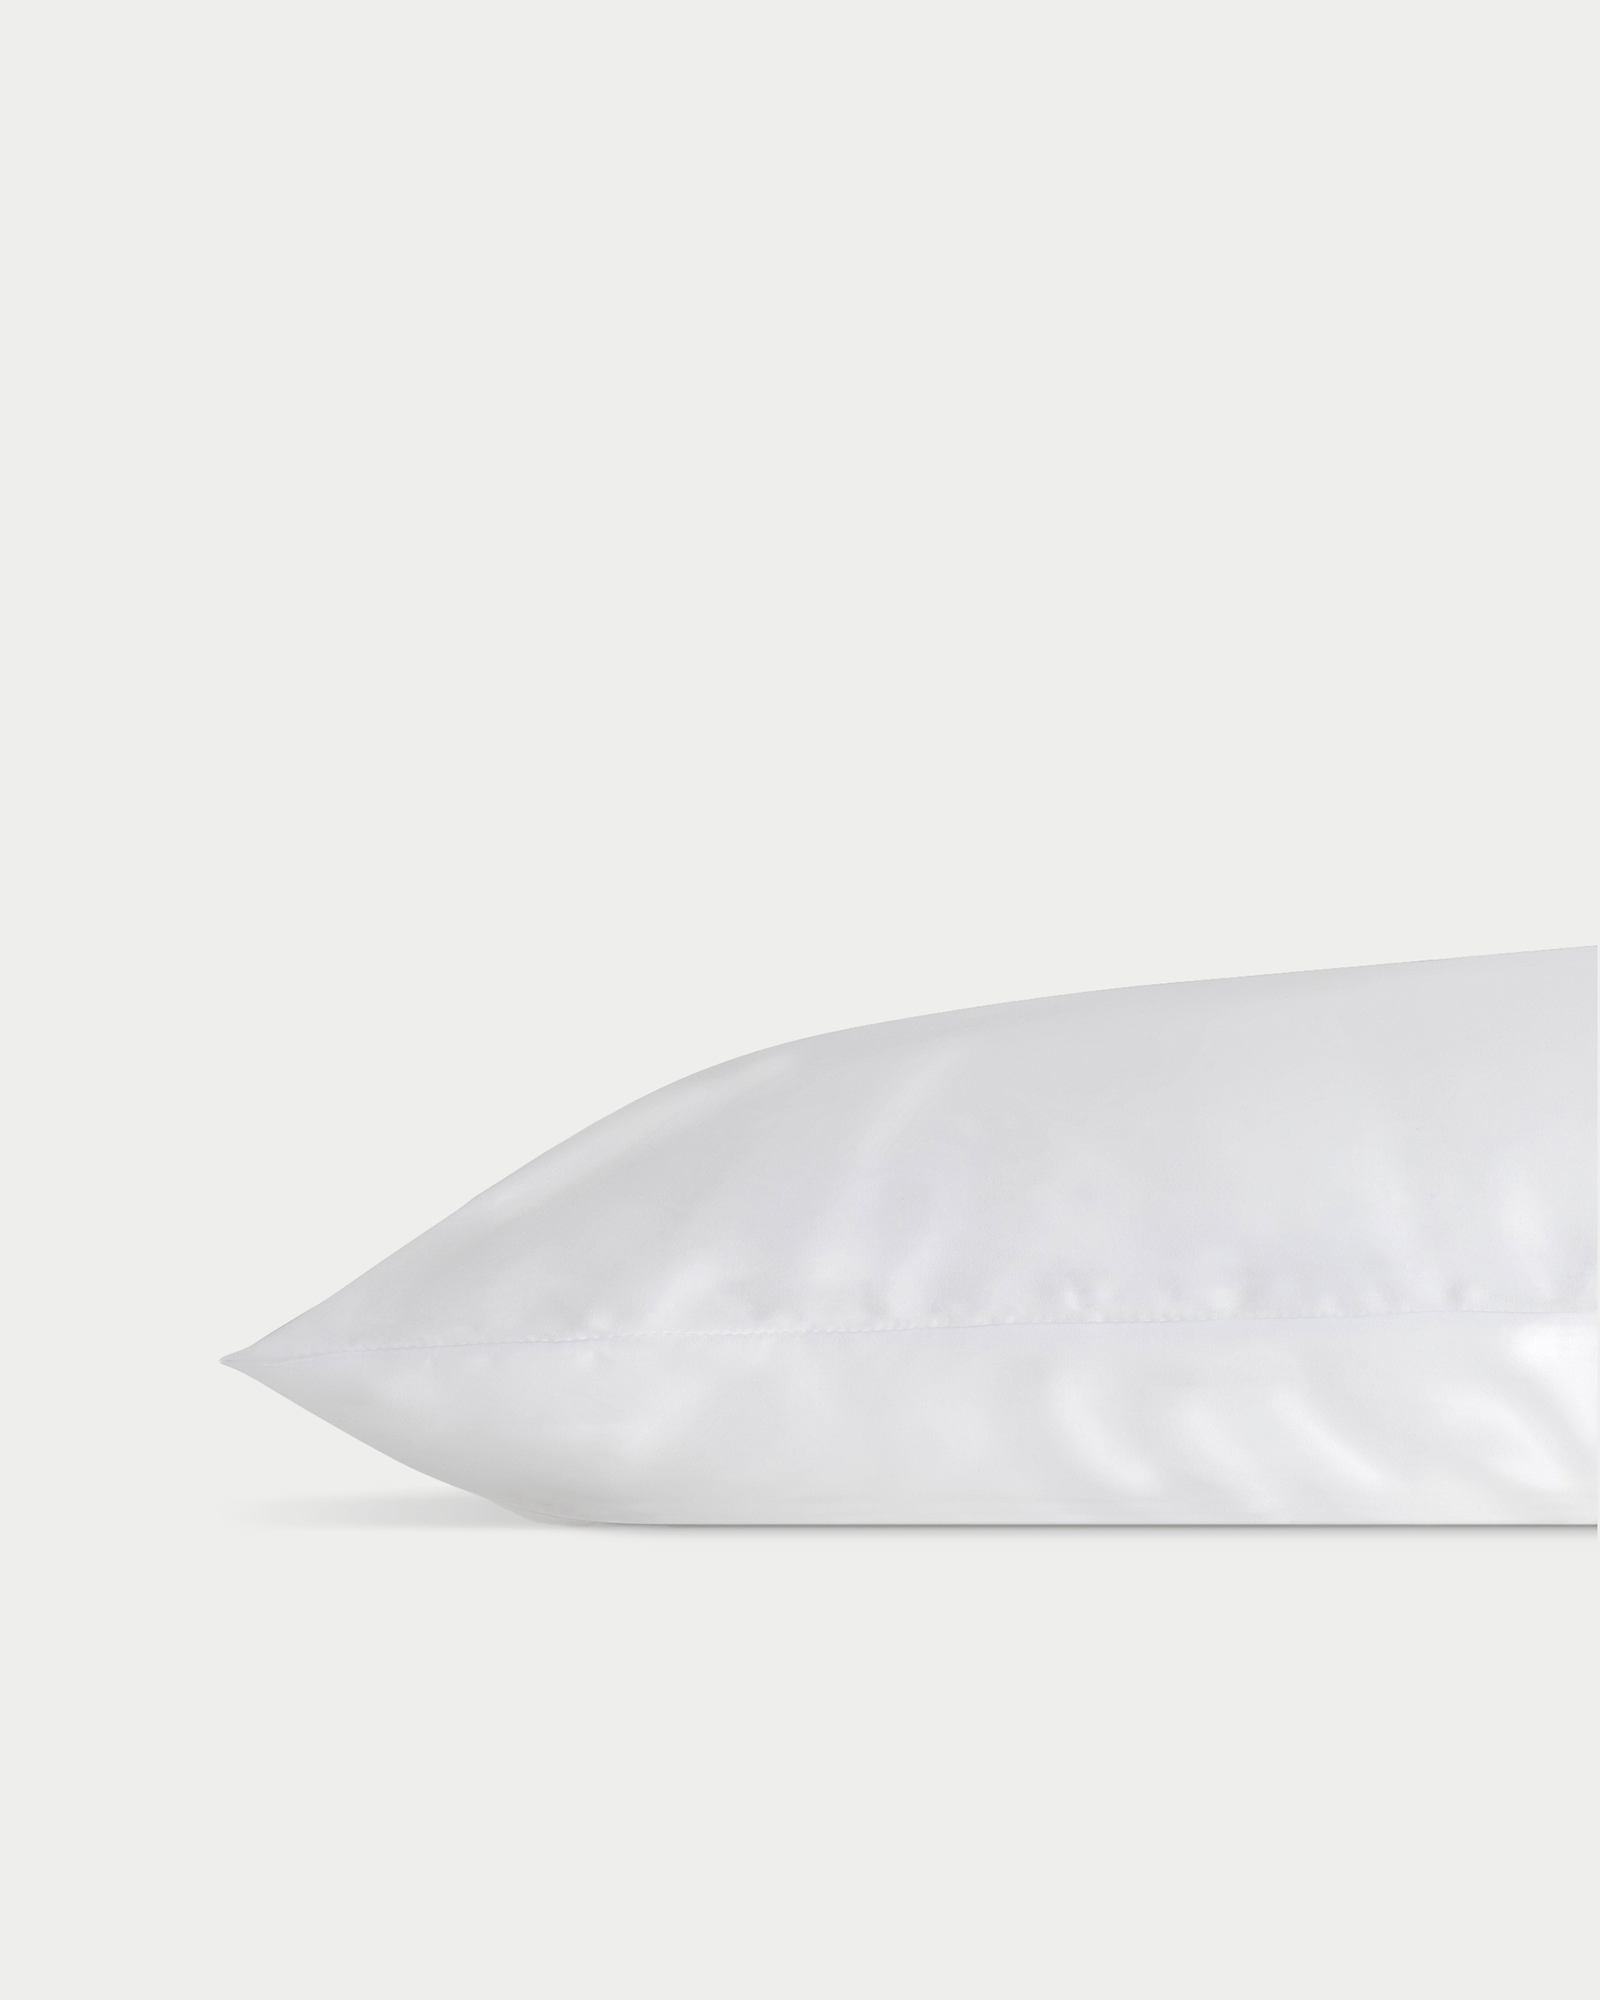 Pearl silk pillowcase with white background 